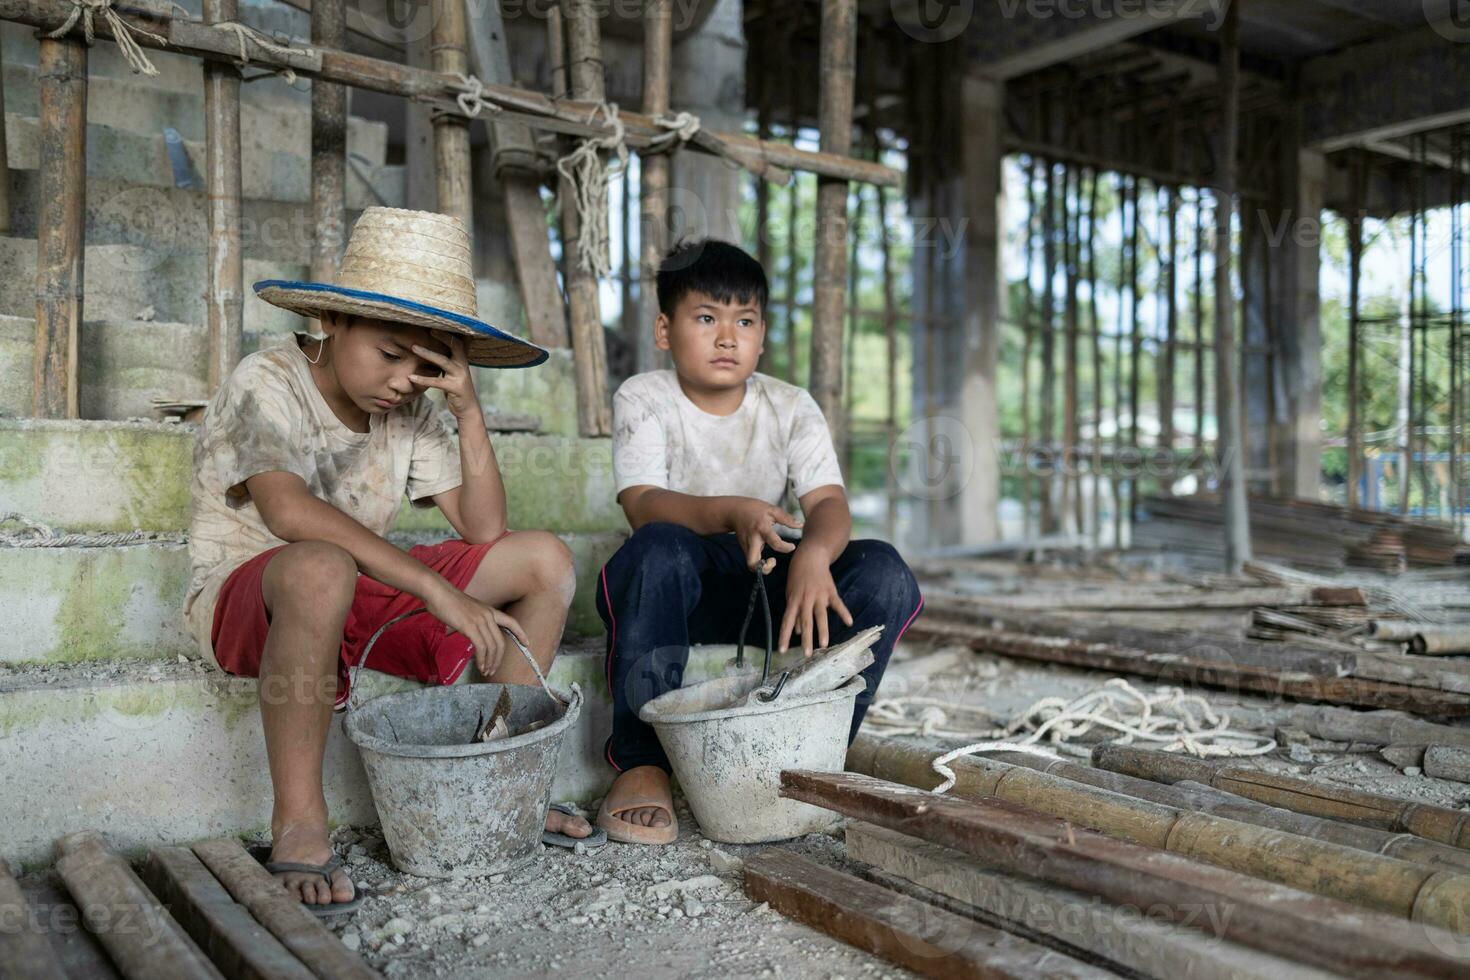 Concept of child labor, poor children being victims of construction labor, human trafficking, child abuse. photo